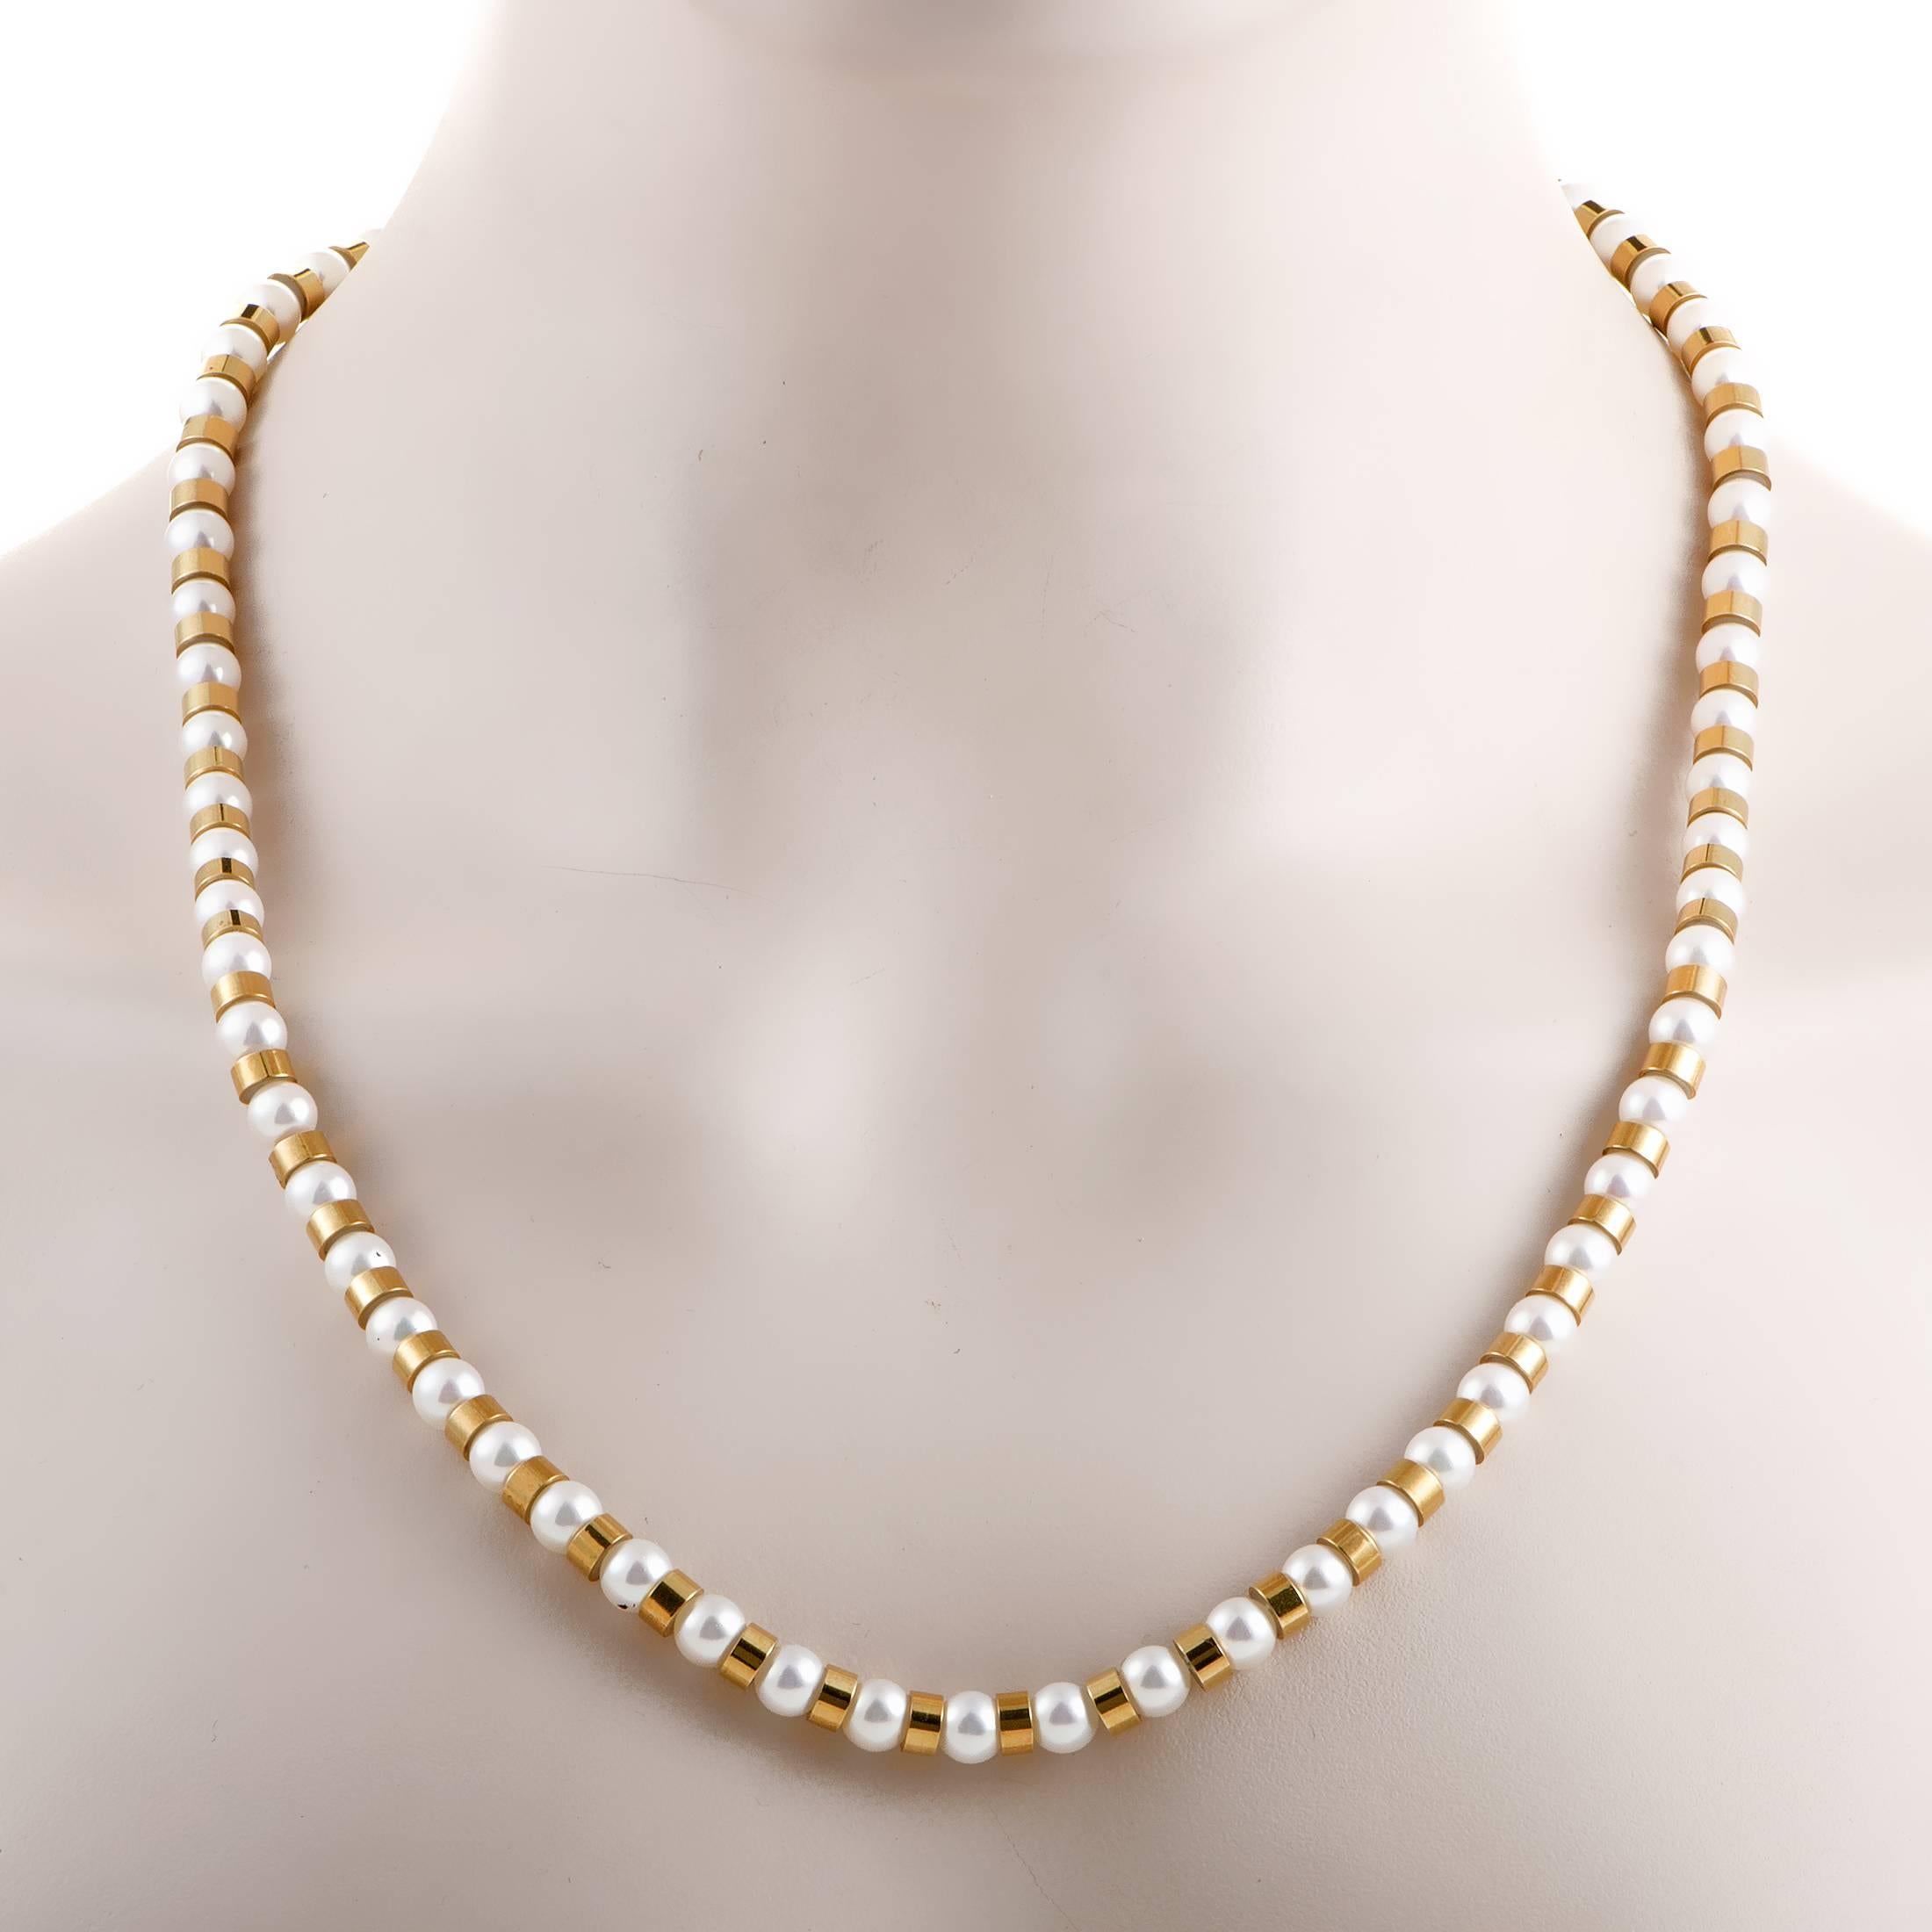 An eye-catching and dazzling effect is produced through fascinatingly neat and aesthetically sublime composition of delightfully bright pearls and radiant 18K yellow gold segments in this magnificent necklace from Chanel.